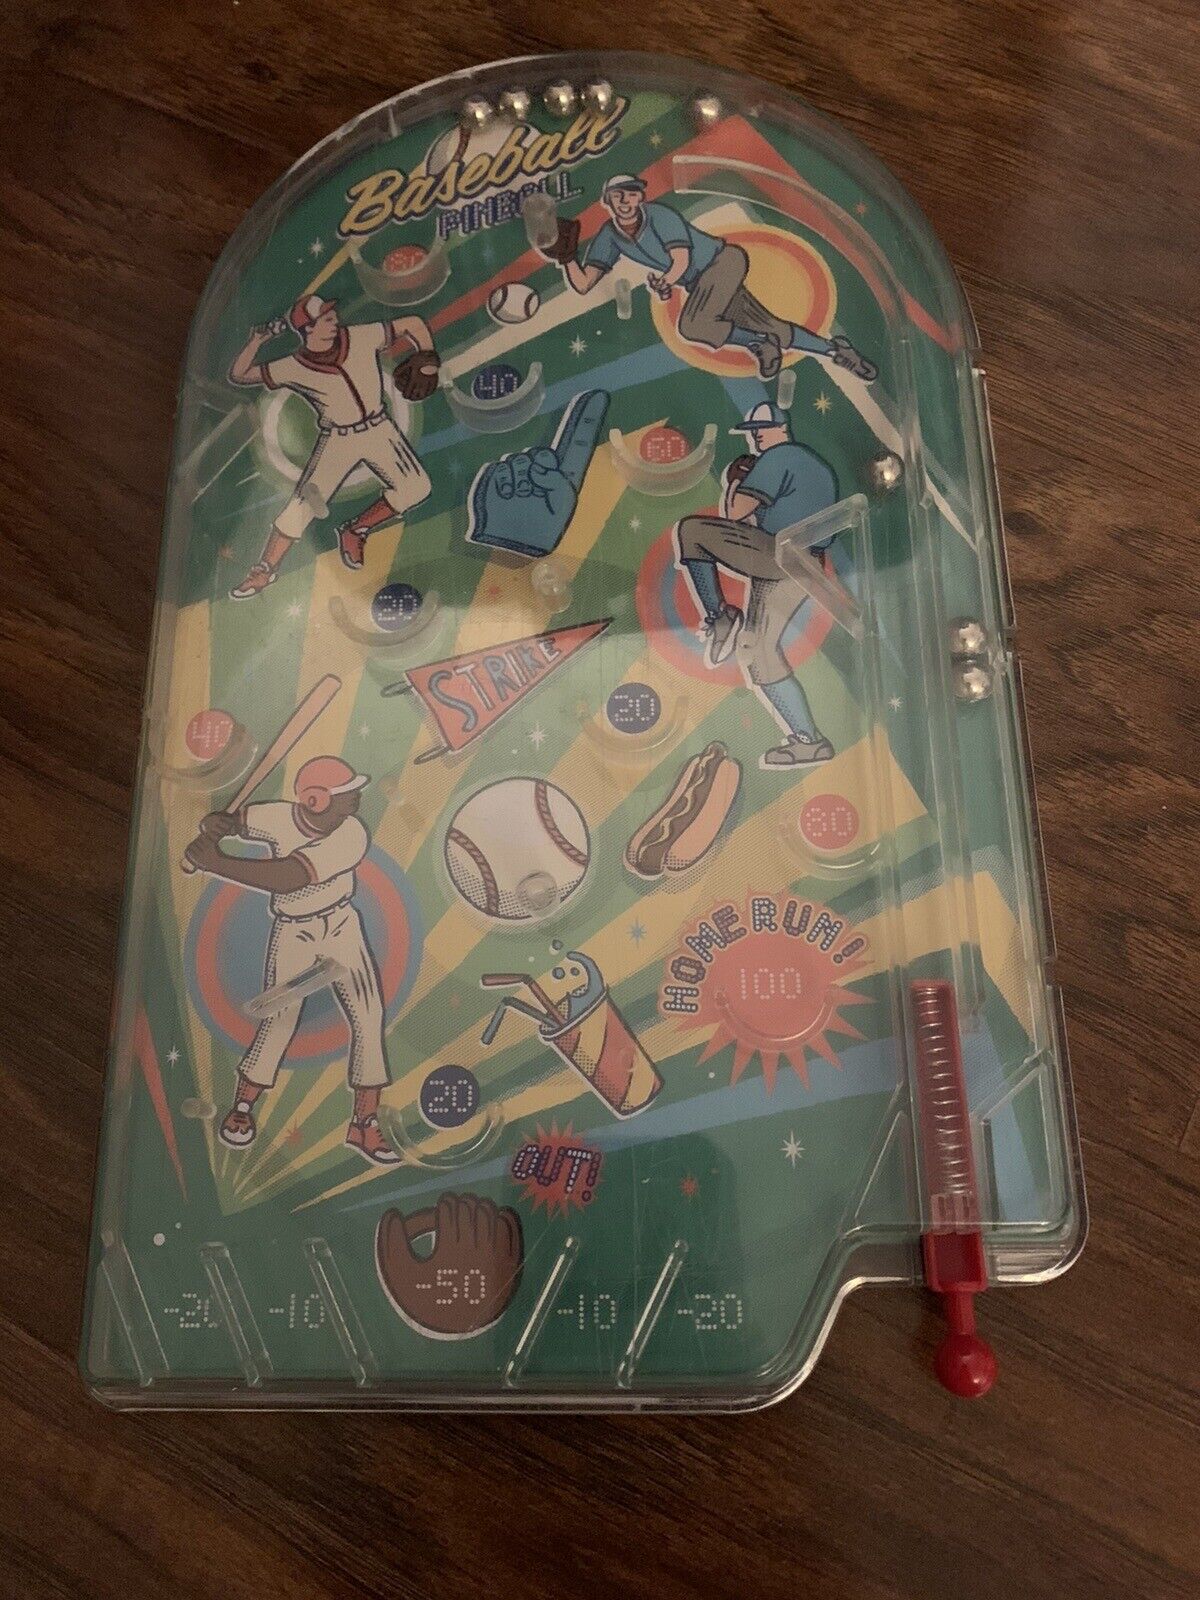 Travel Baseball Pinball Game for Kids or Adults - 2017 Made By Ridley’s